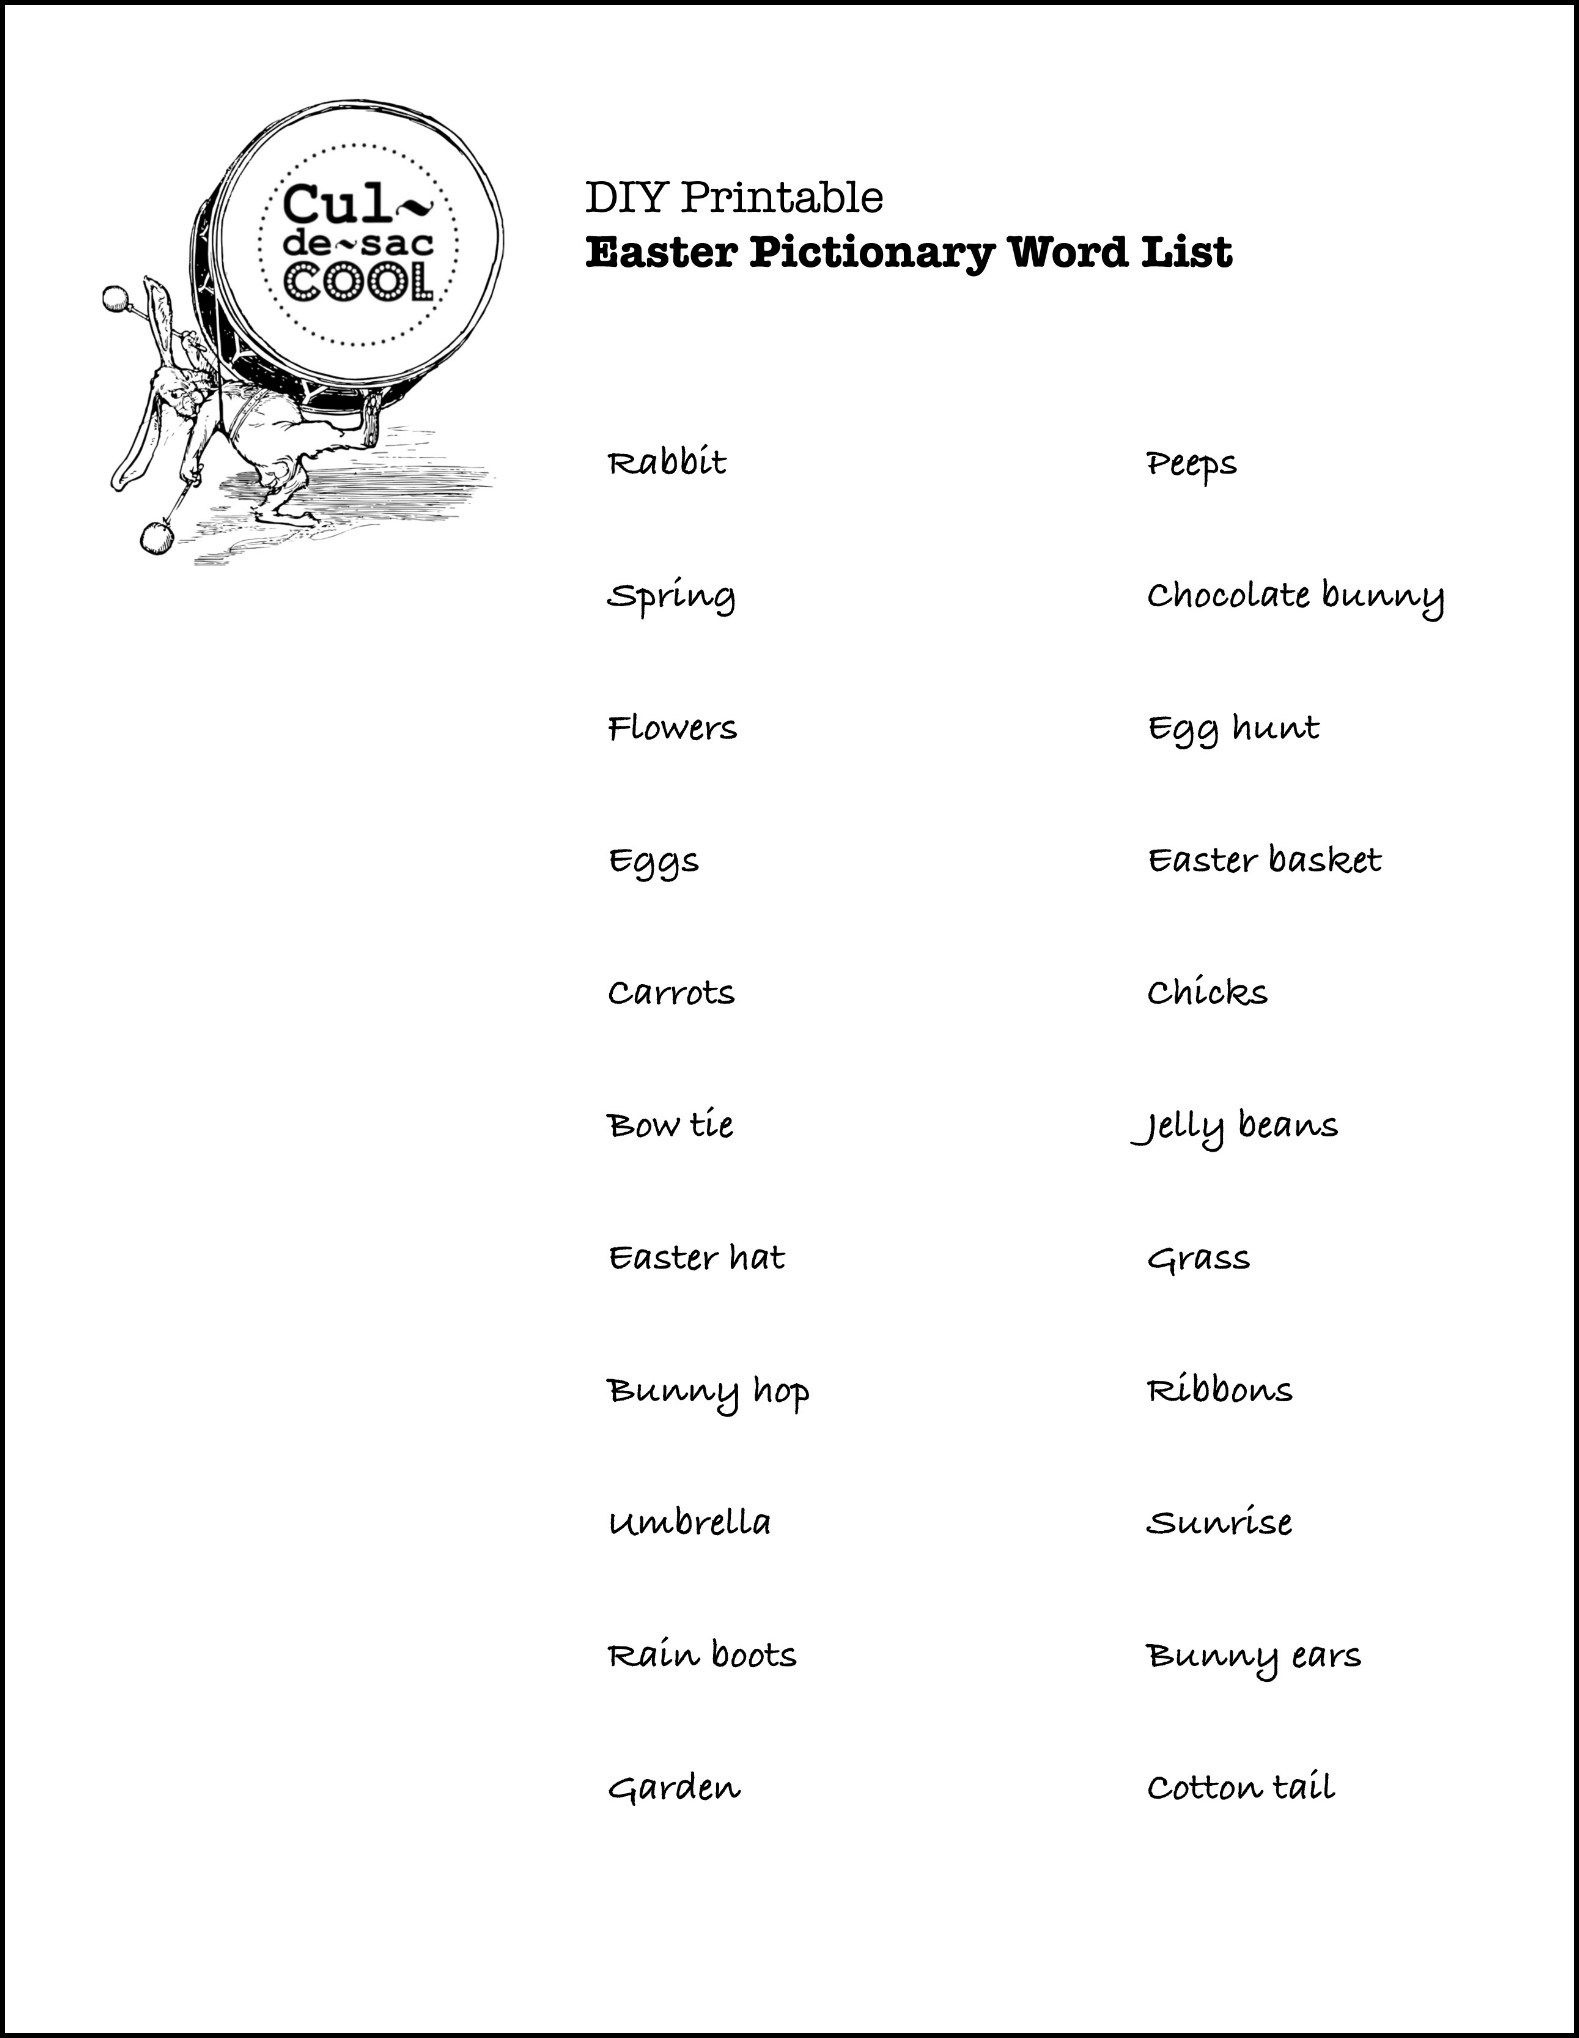 Easter Pictionary Word List Plus Other Fun Games For Easer | Easter - Free Printable Pictionary Cards